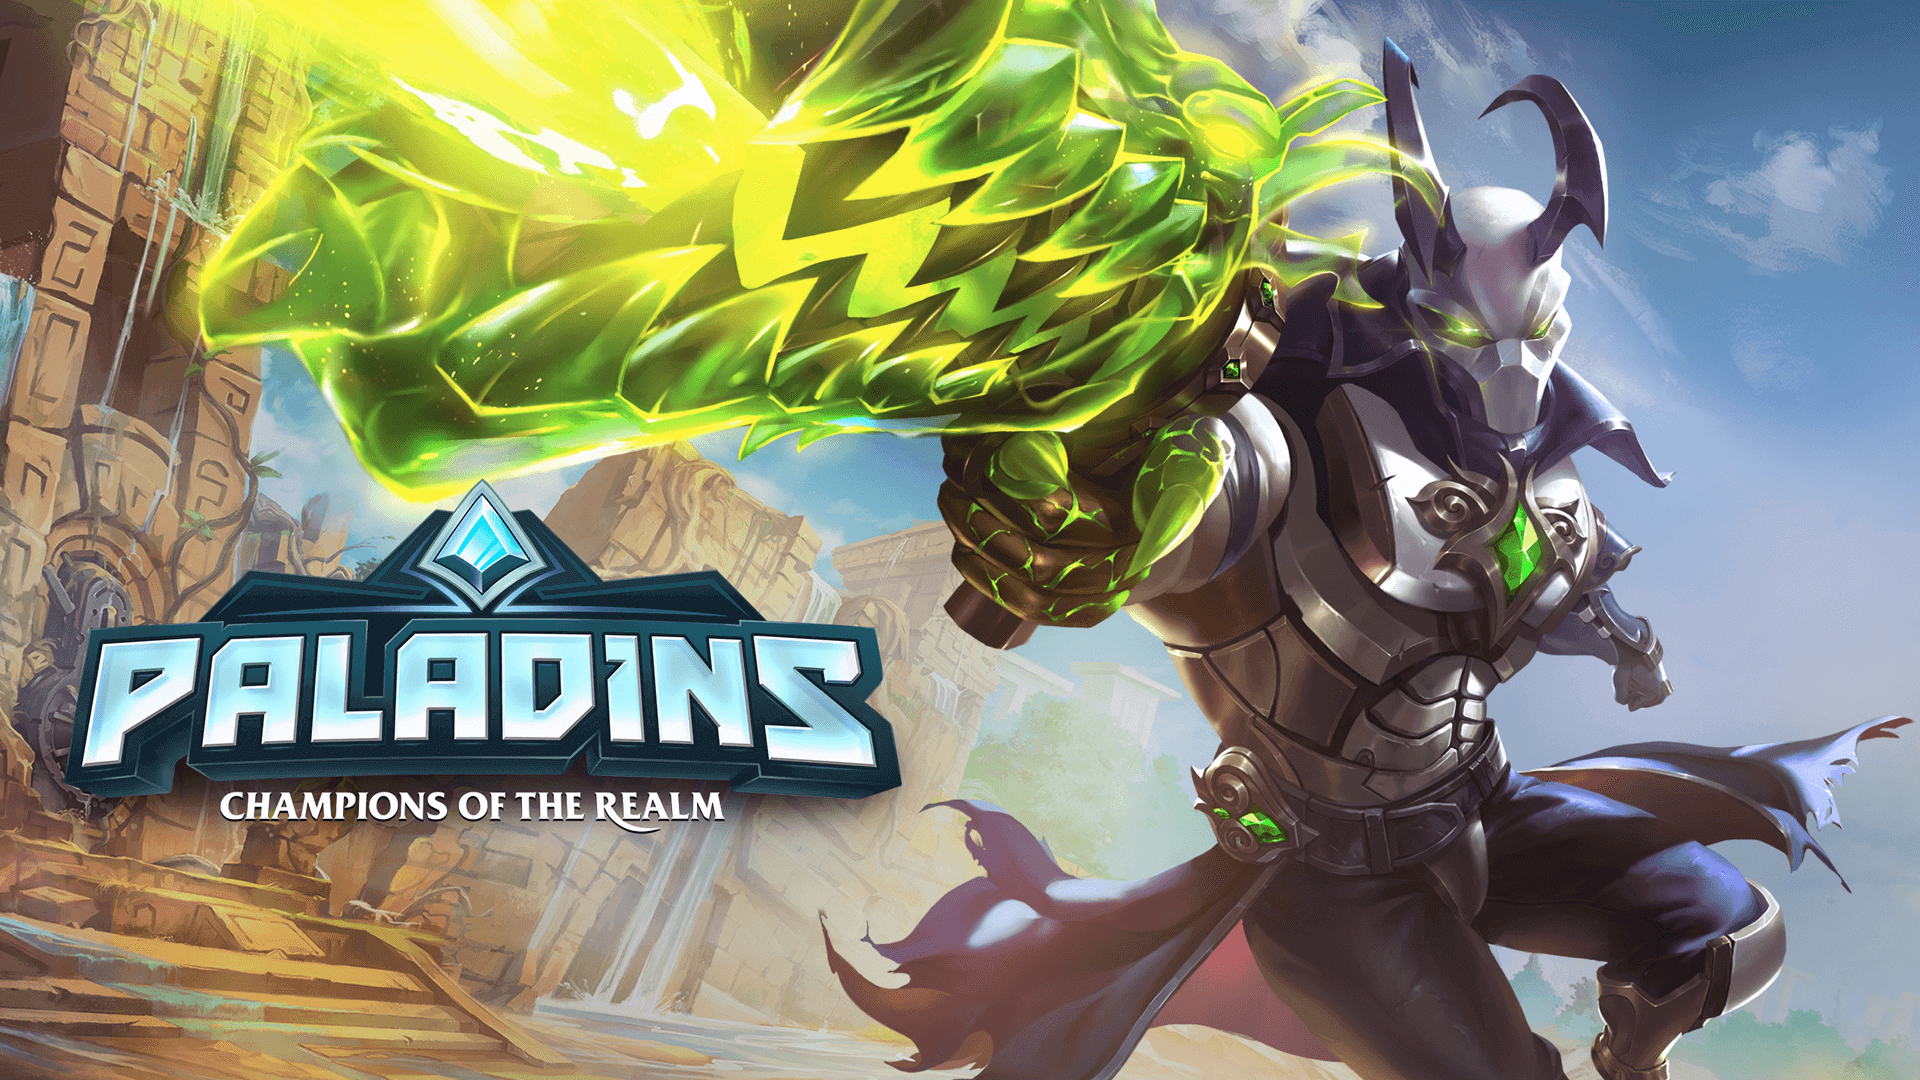 Become a legendary Champion in Paladins, free to play on the Epic Games Store. Celebrate launch with a FREE Bundle!!